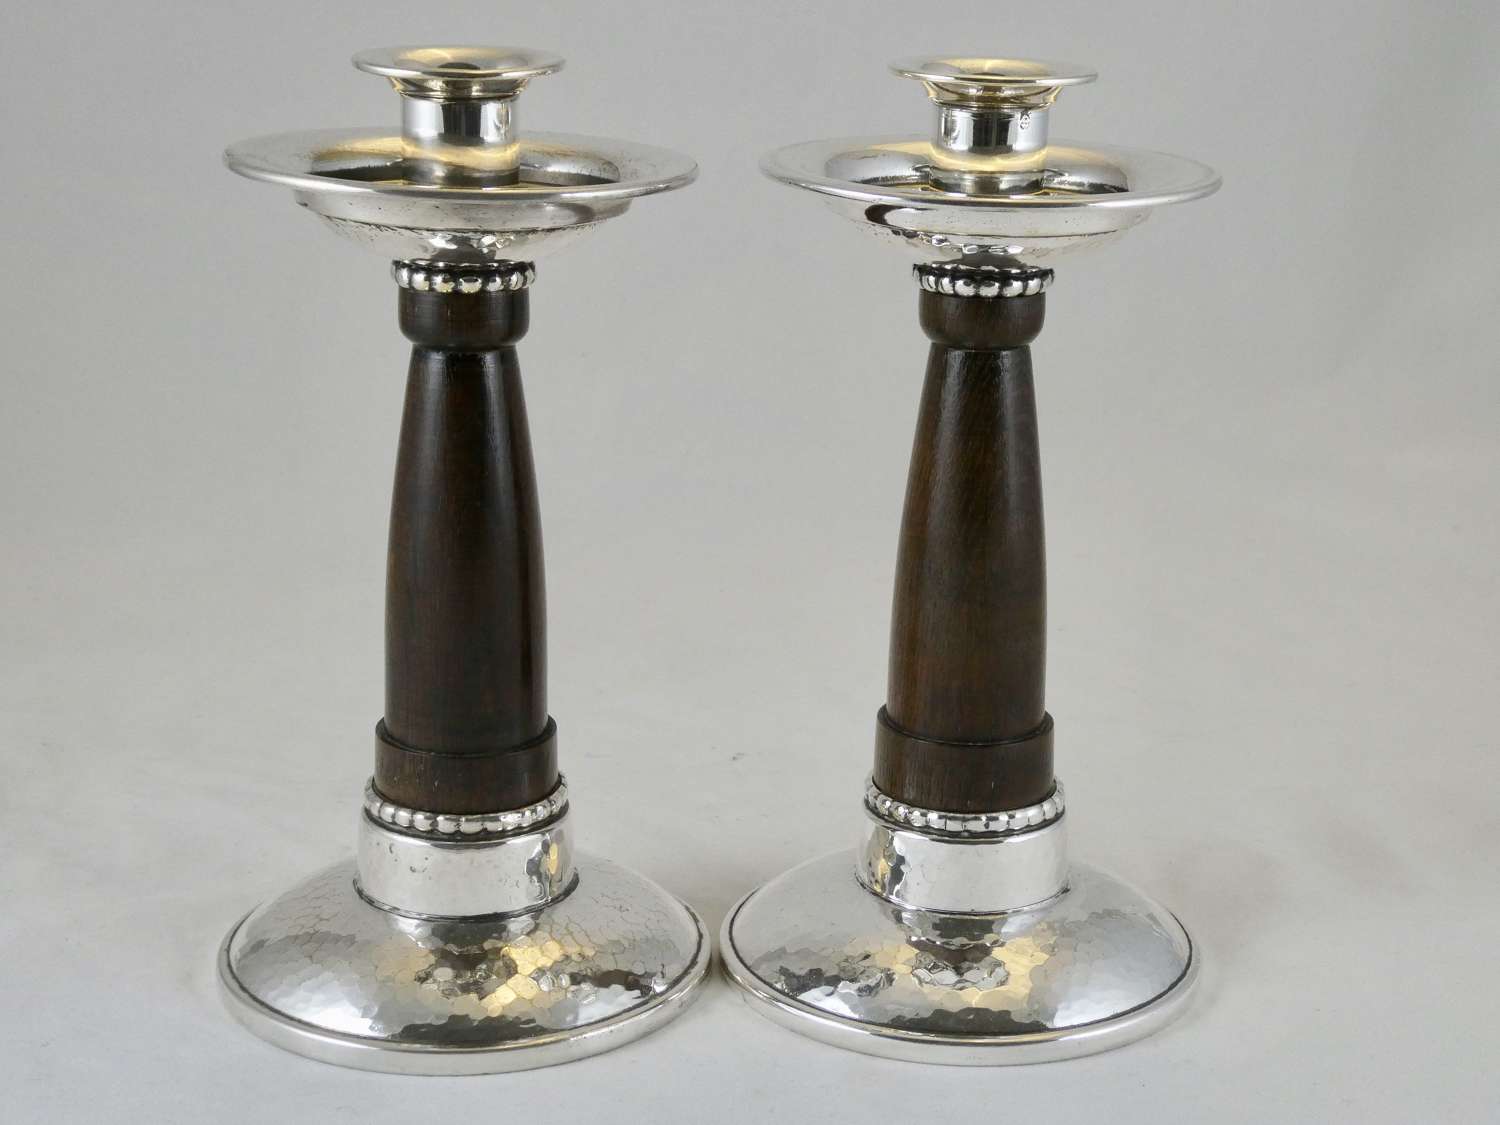 Pair of WMF Secessionist Candlesticks